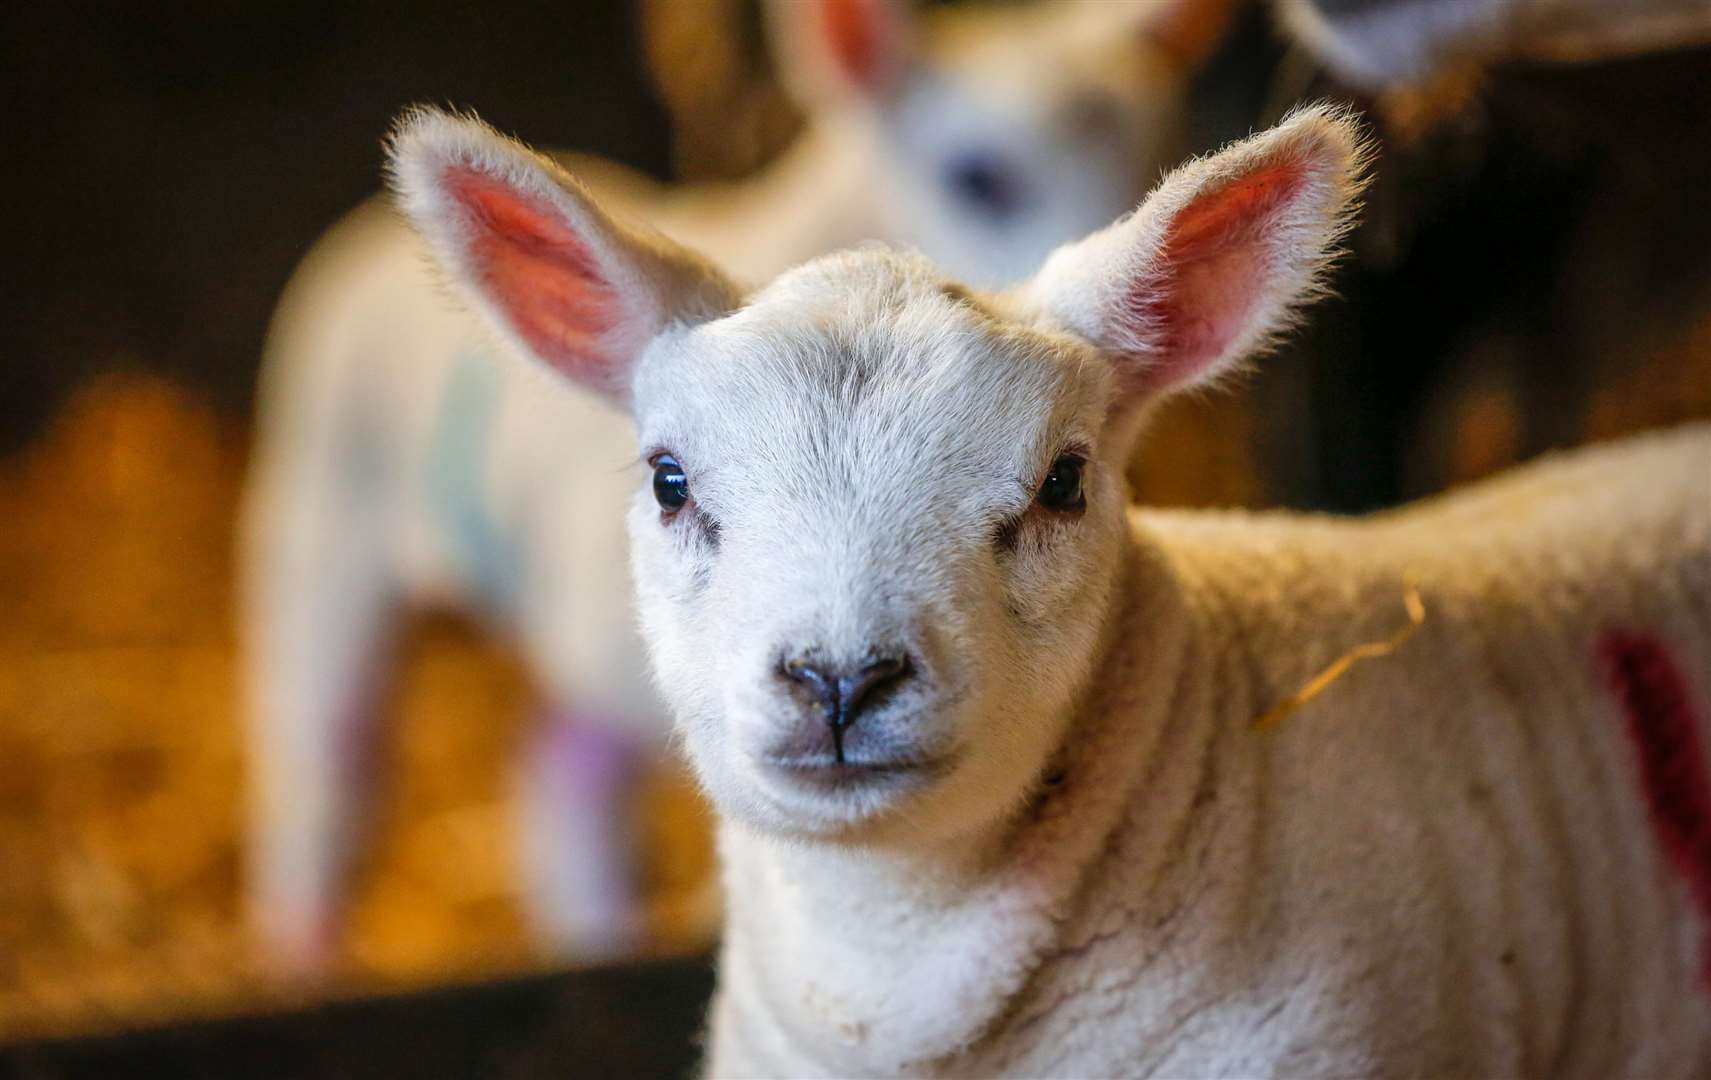 New born lambs will have a spring in their step. Picture: Matthew Walker